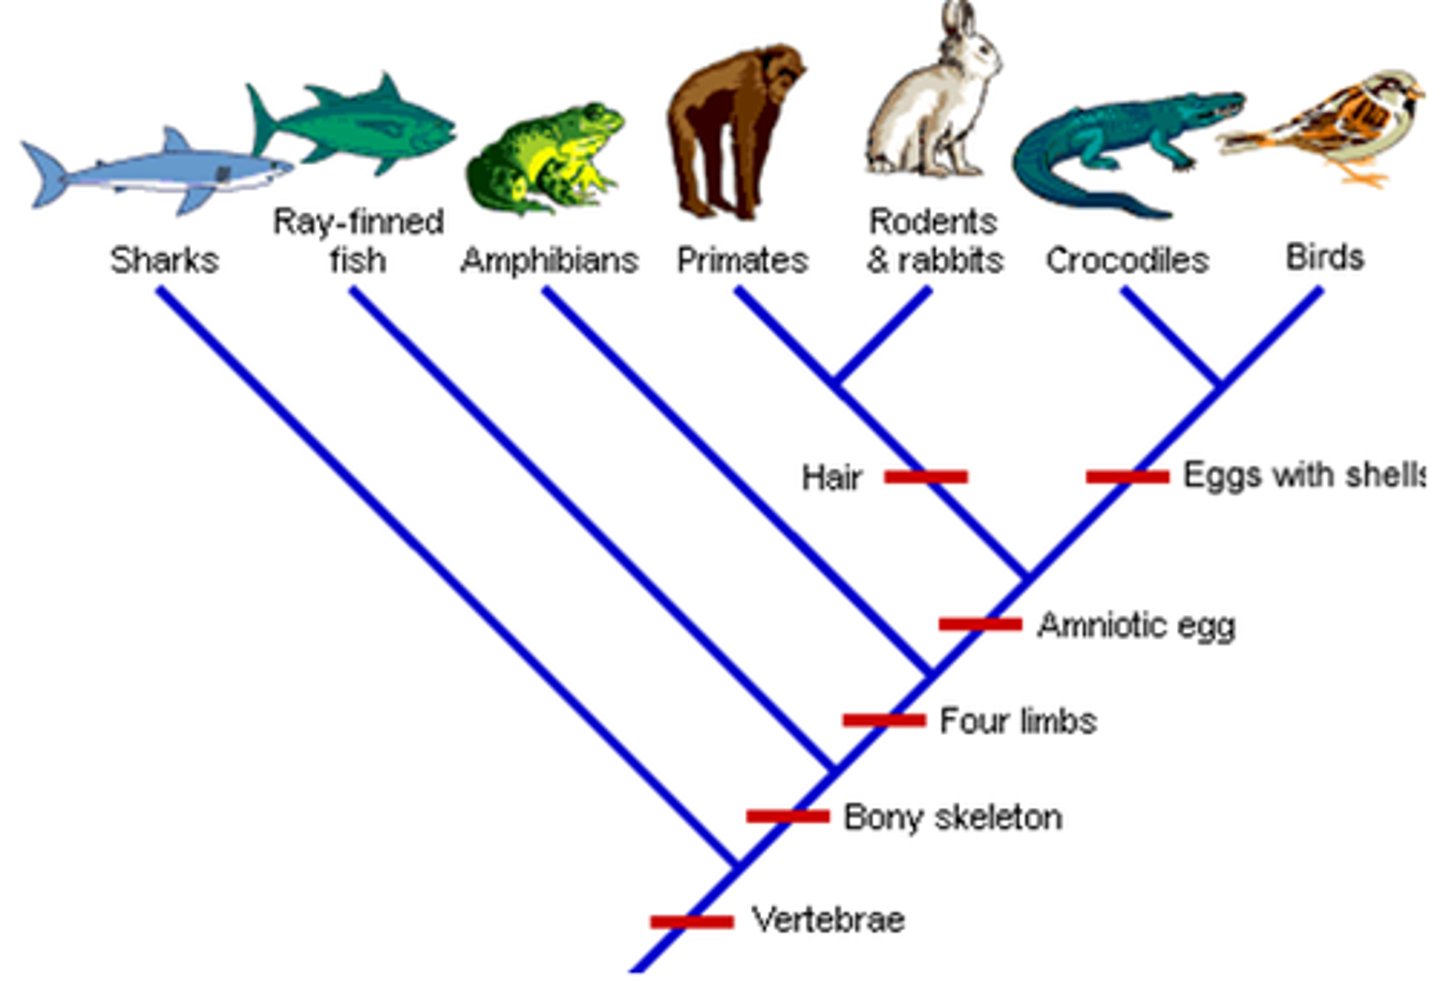 <p>A branching diagram depicting the successive points of species divergence from common ancestral lines without regard to the degree of deviation.</p><p>-Length of branches unimportant</p>